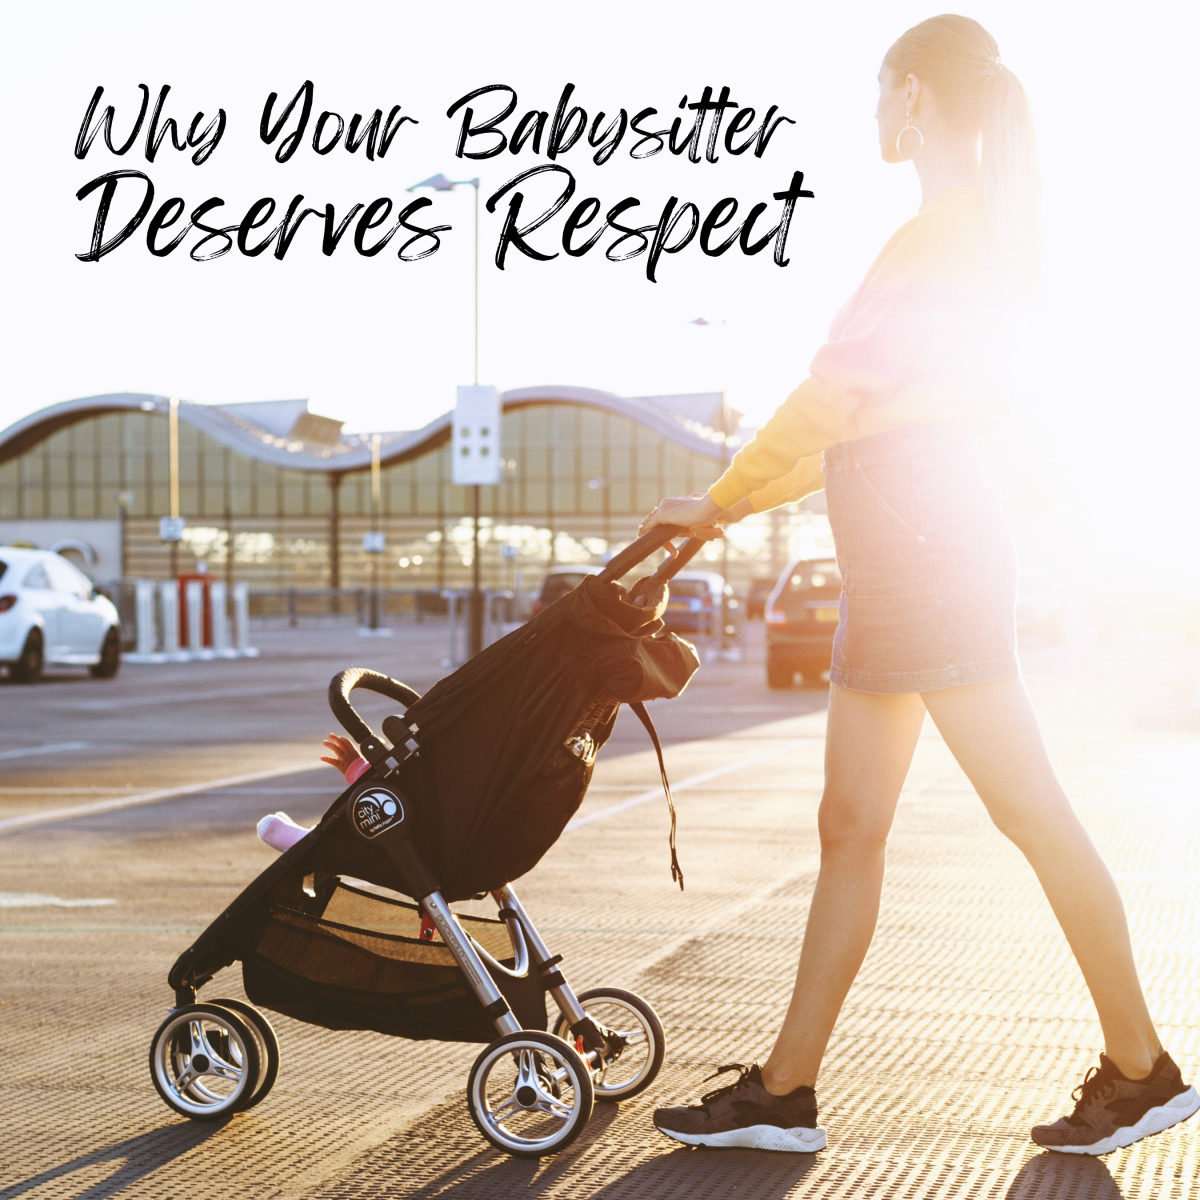 Respect goes a long way. For those who babysit your children, it matters even more. 